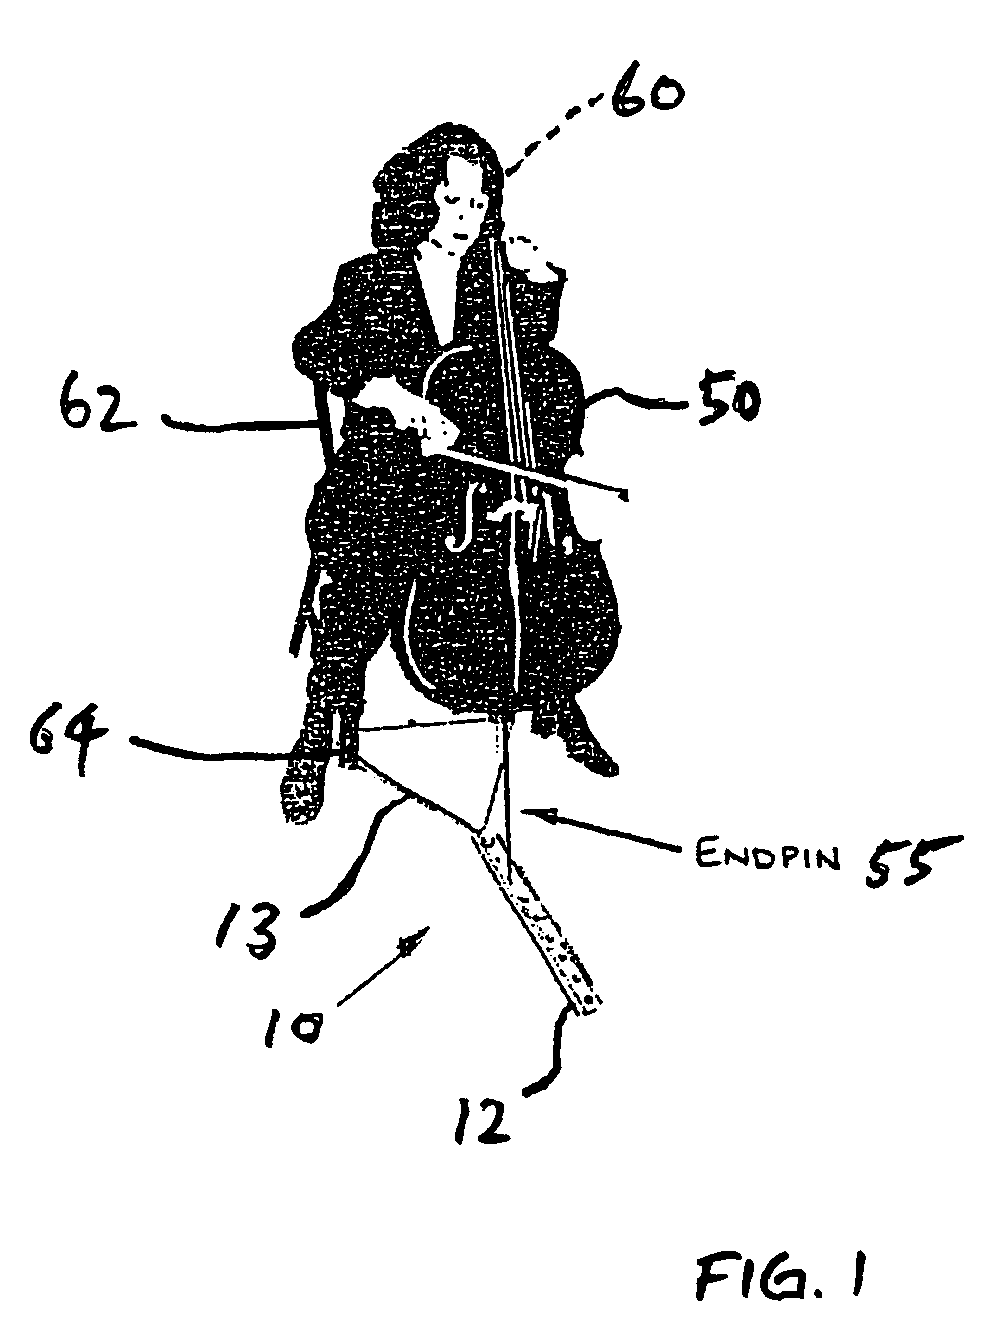 Restraint for endpin of a cello or other floor-resting stringed musical instruments